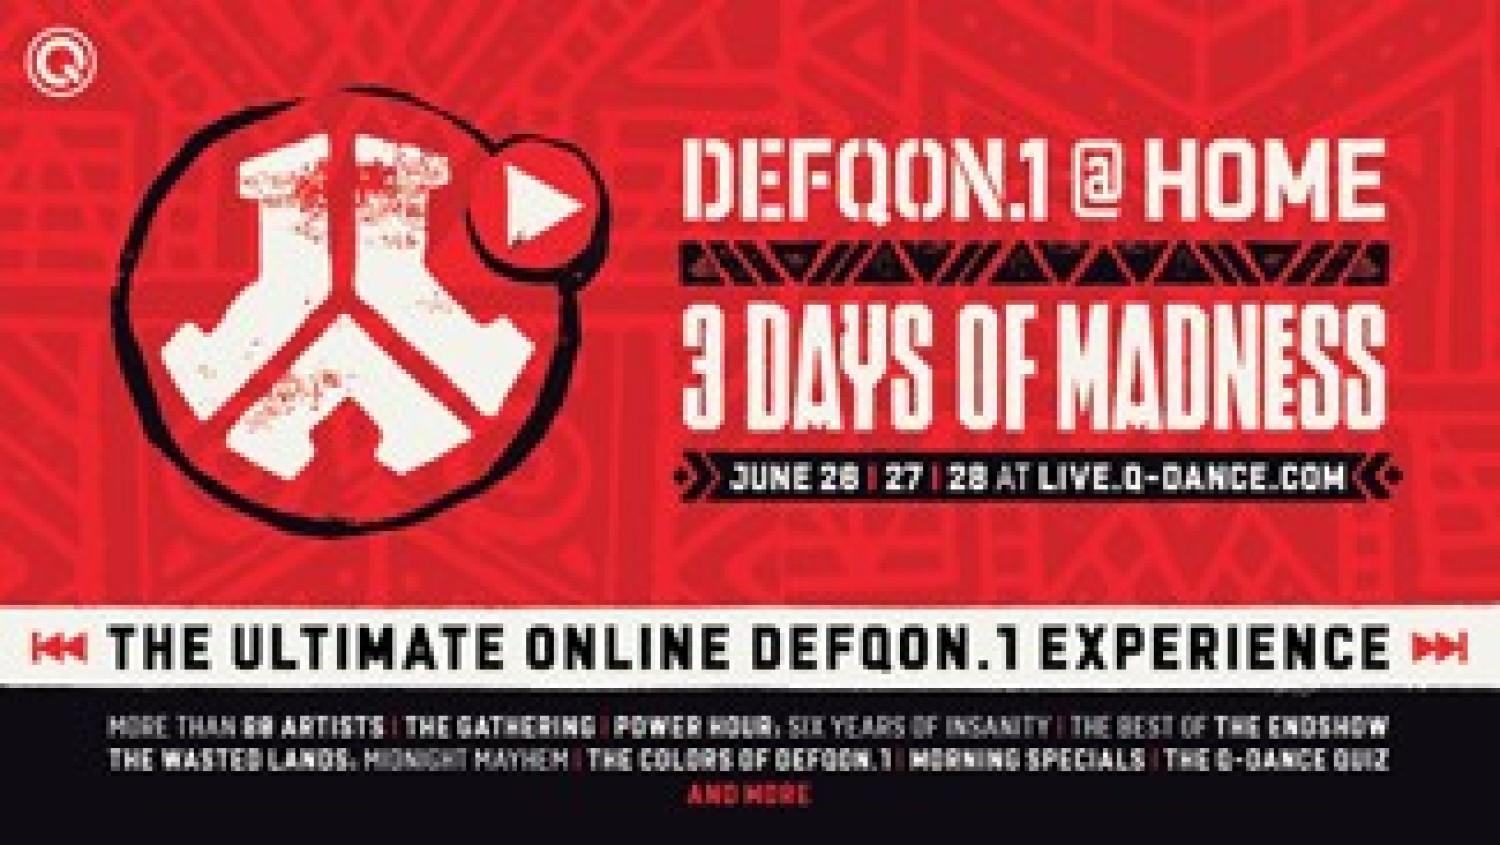 Party nieuws: Volledige line-up Defqon.1 at Home bekend!